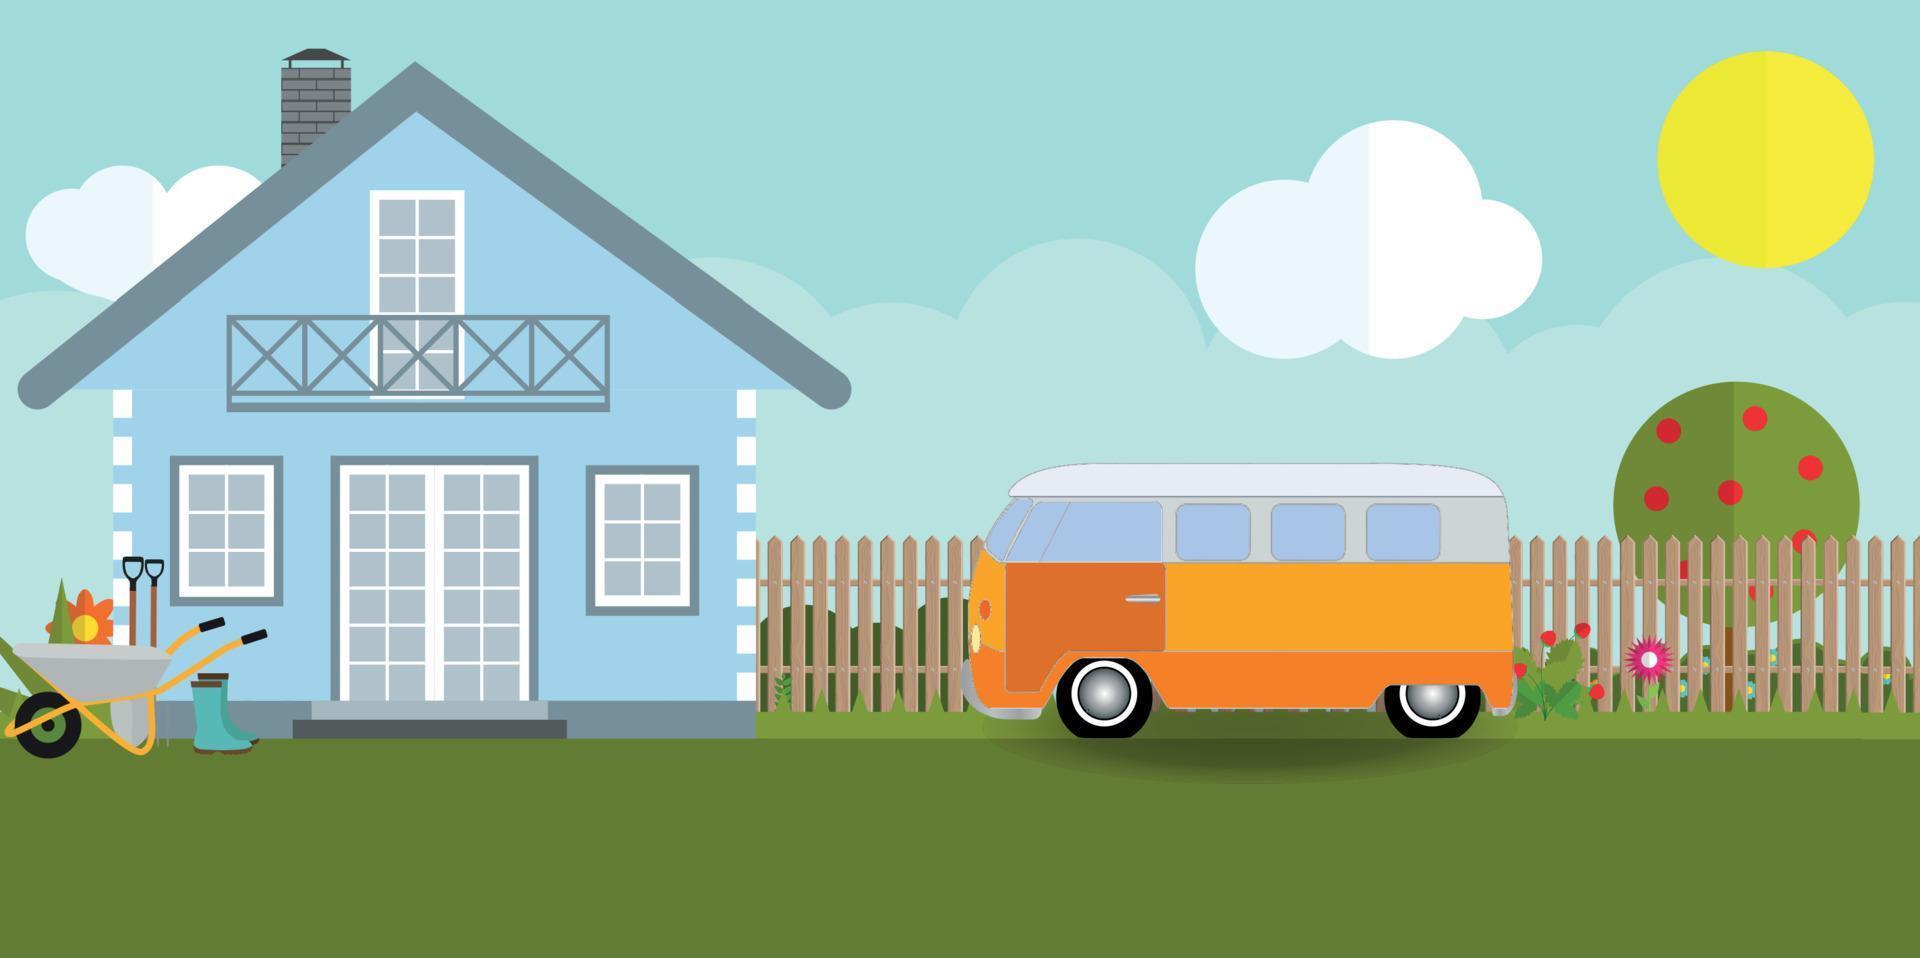 House in nature with apple trees, cars, flowers, garden tools. Vector Illustration.